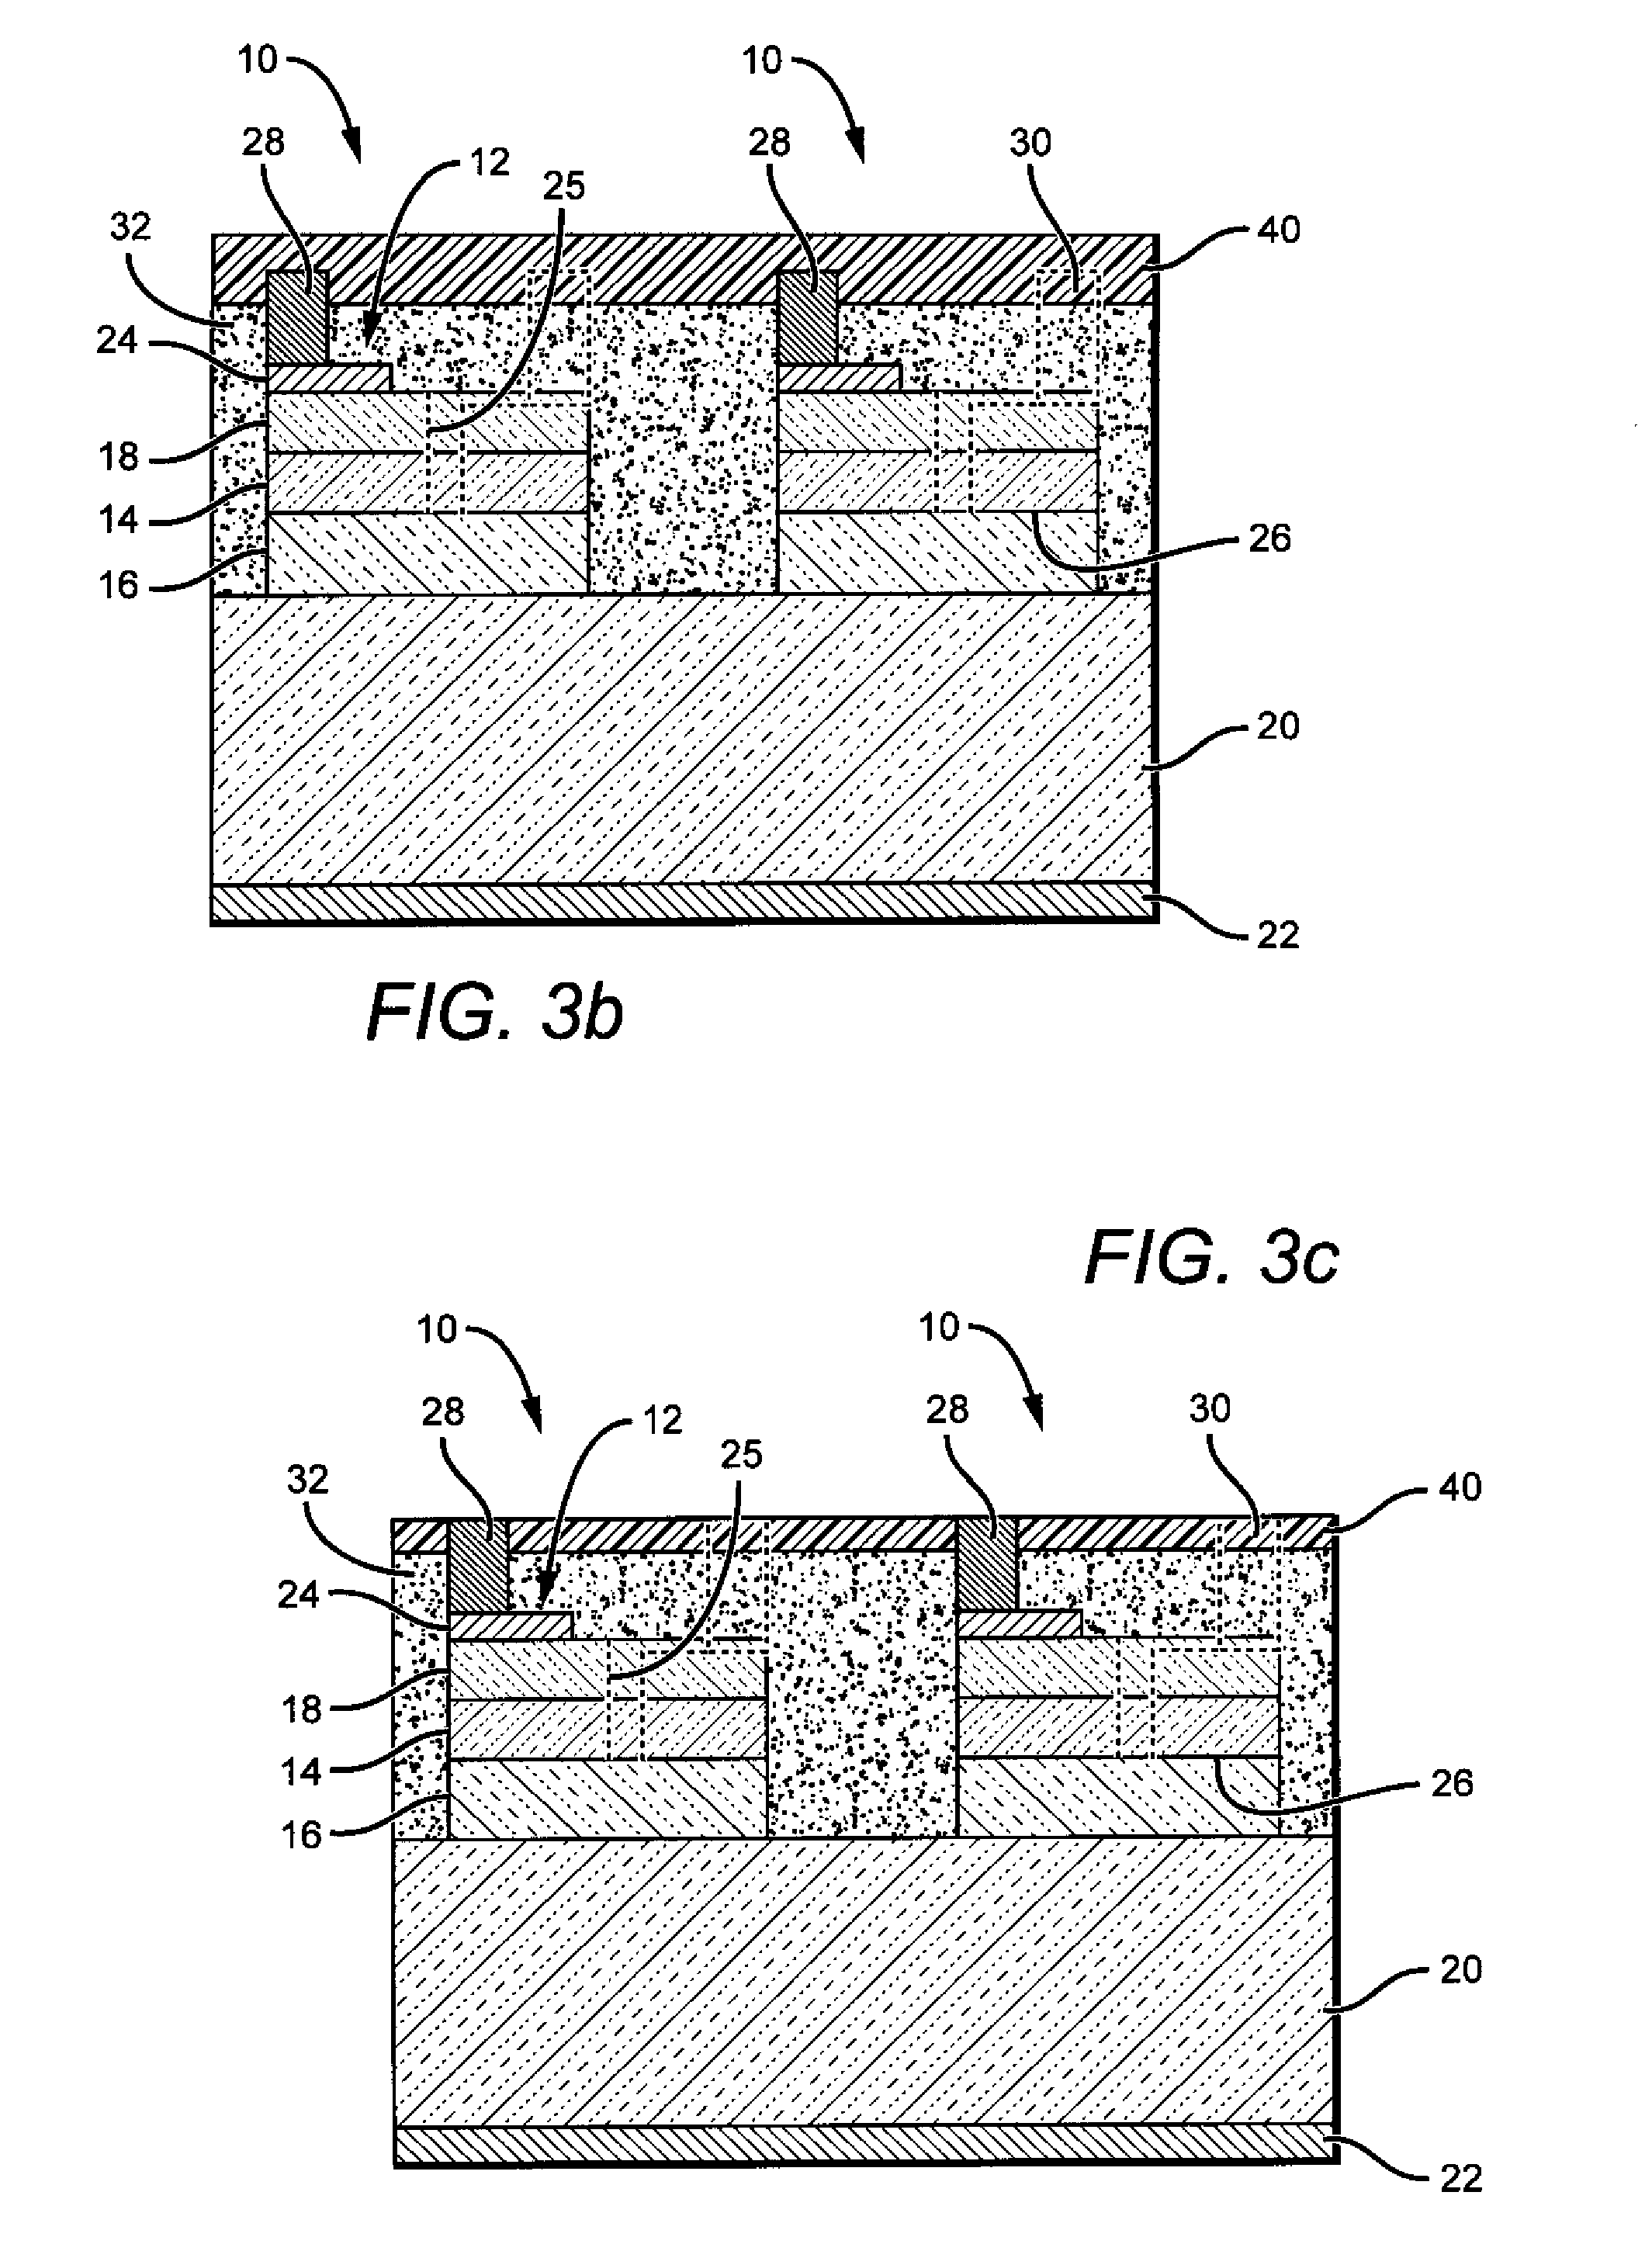 Light transmission control for masking appearance of solid state light sources